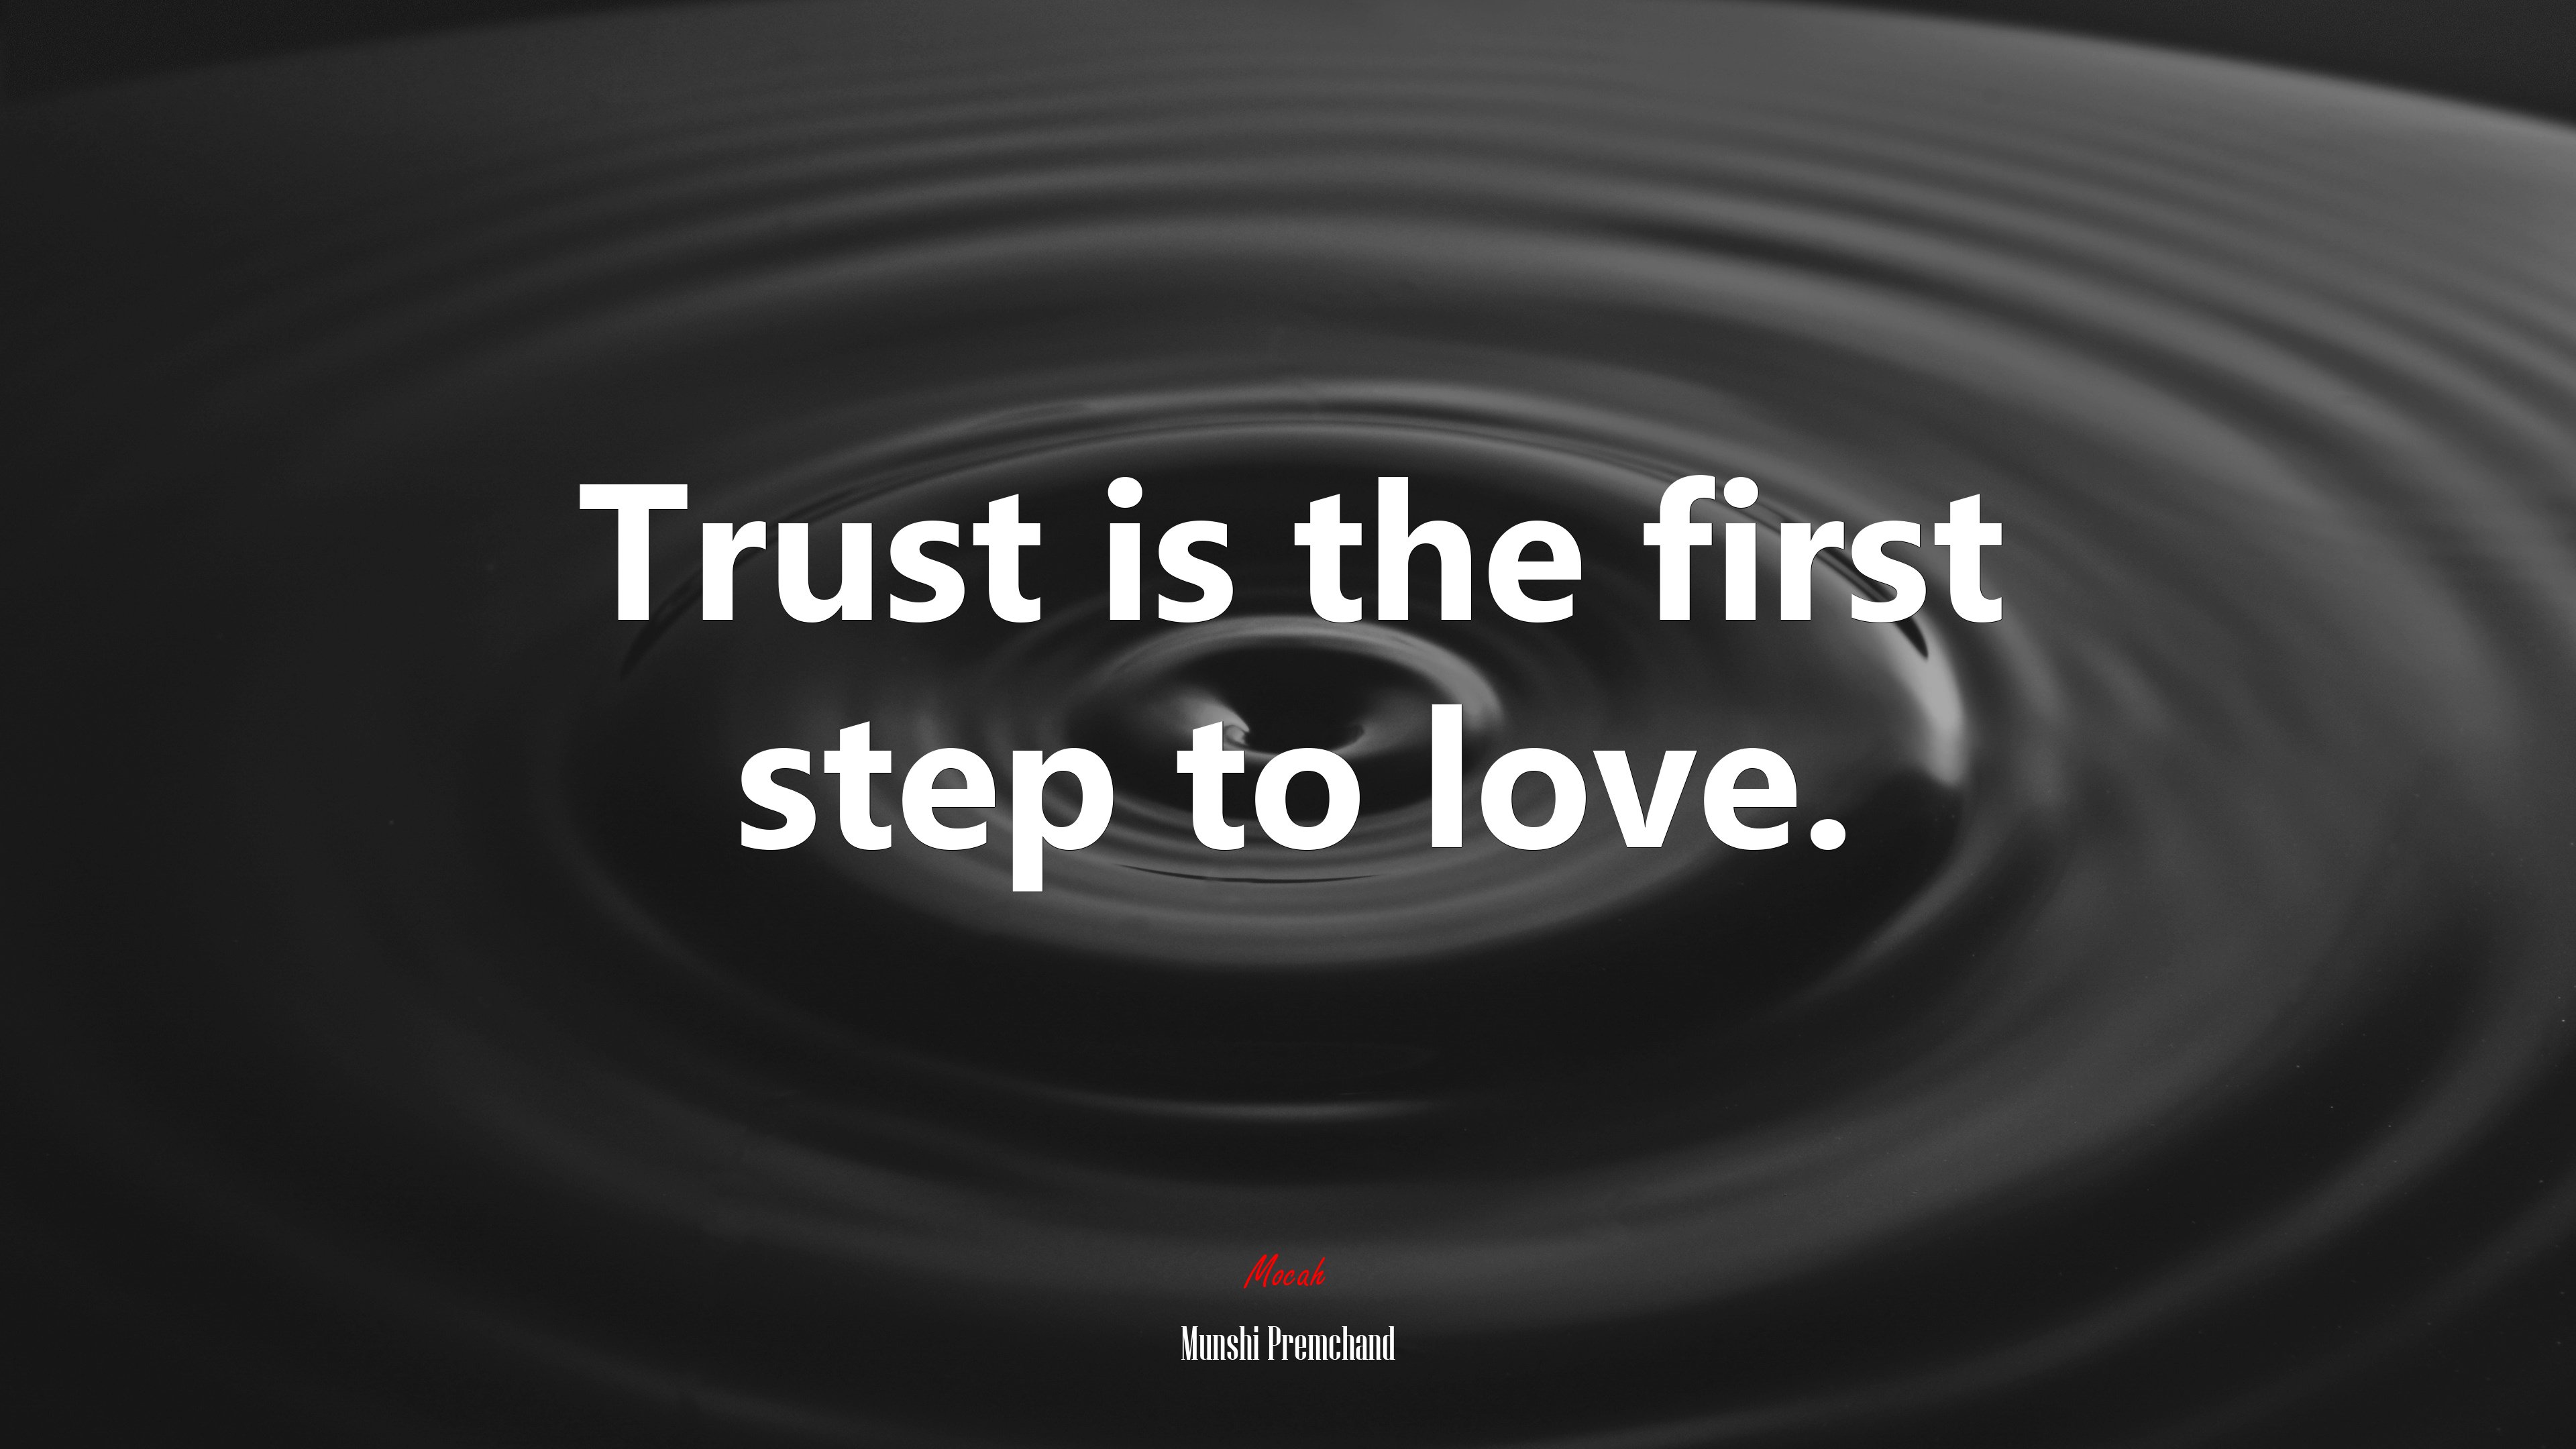 Trust is the first step to love. Munshi Premchand quote Gallery HD Wallpaper